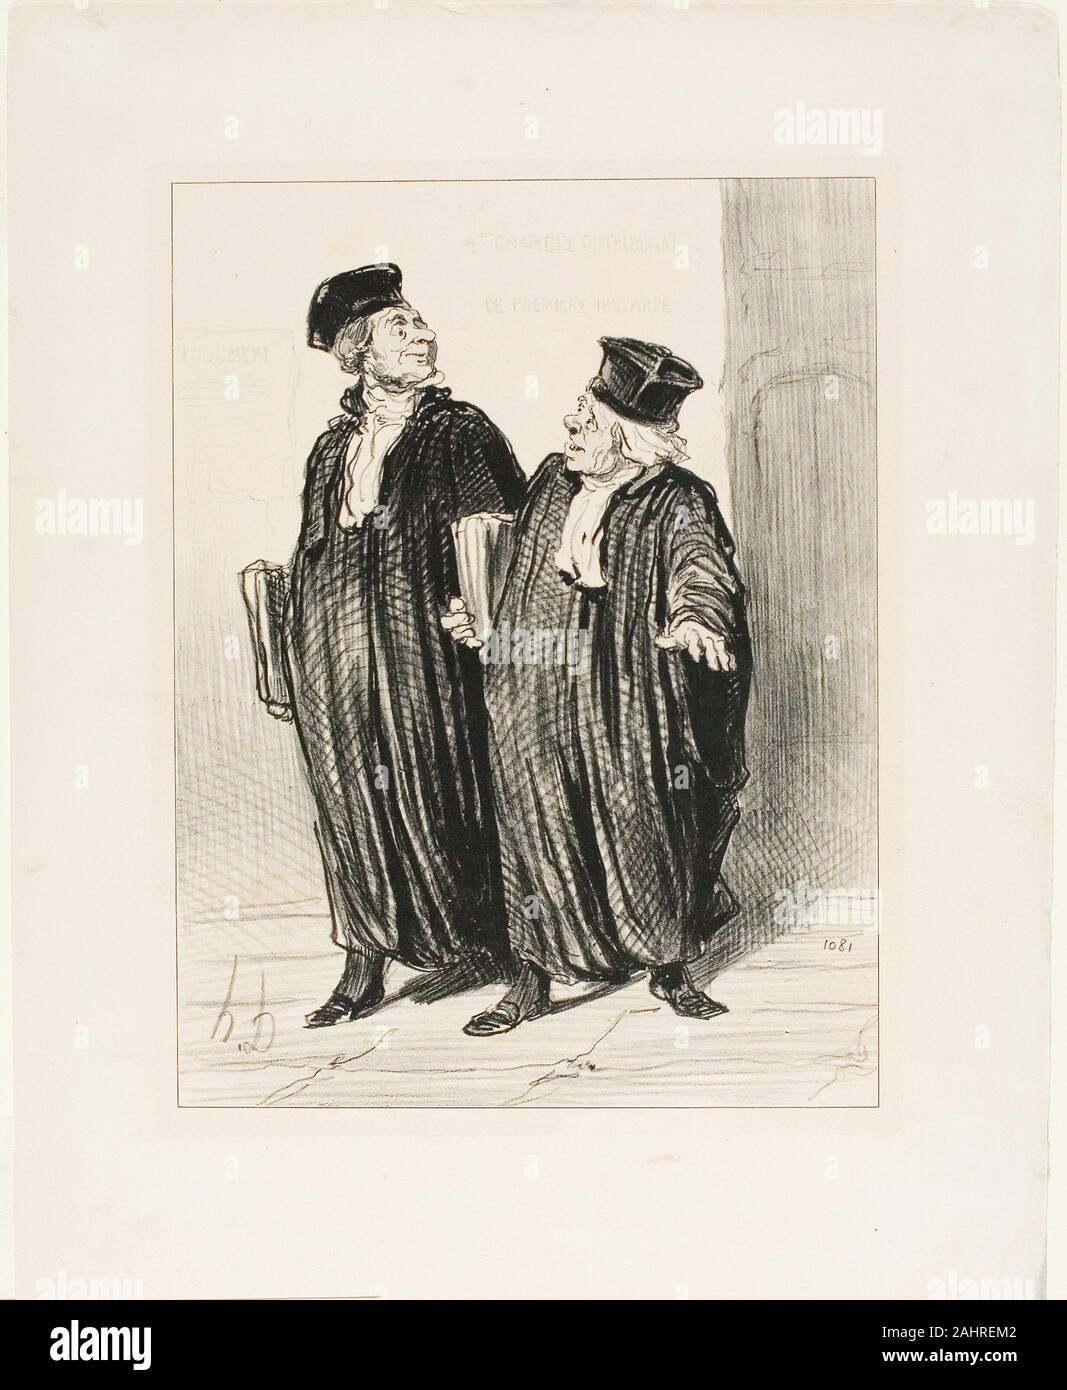 Honoré-Victorin Daumier. “- Finally we obtained the division of property between husband and wife... - about time, there was no more money left to divide,” plate 3 from Les Avocats Et Les Plaideurs. 1851. France. Lithograph in black on white wove paper Stock Photo